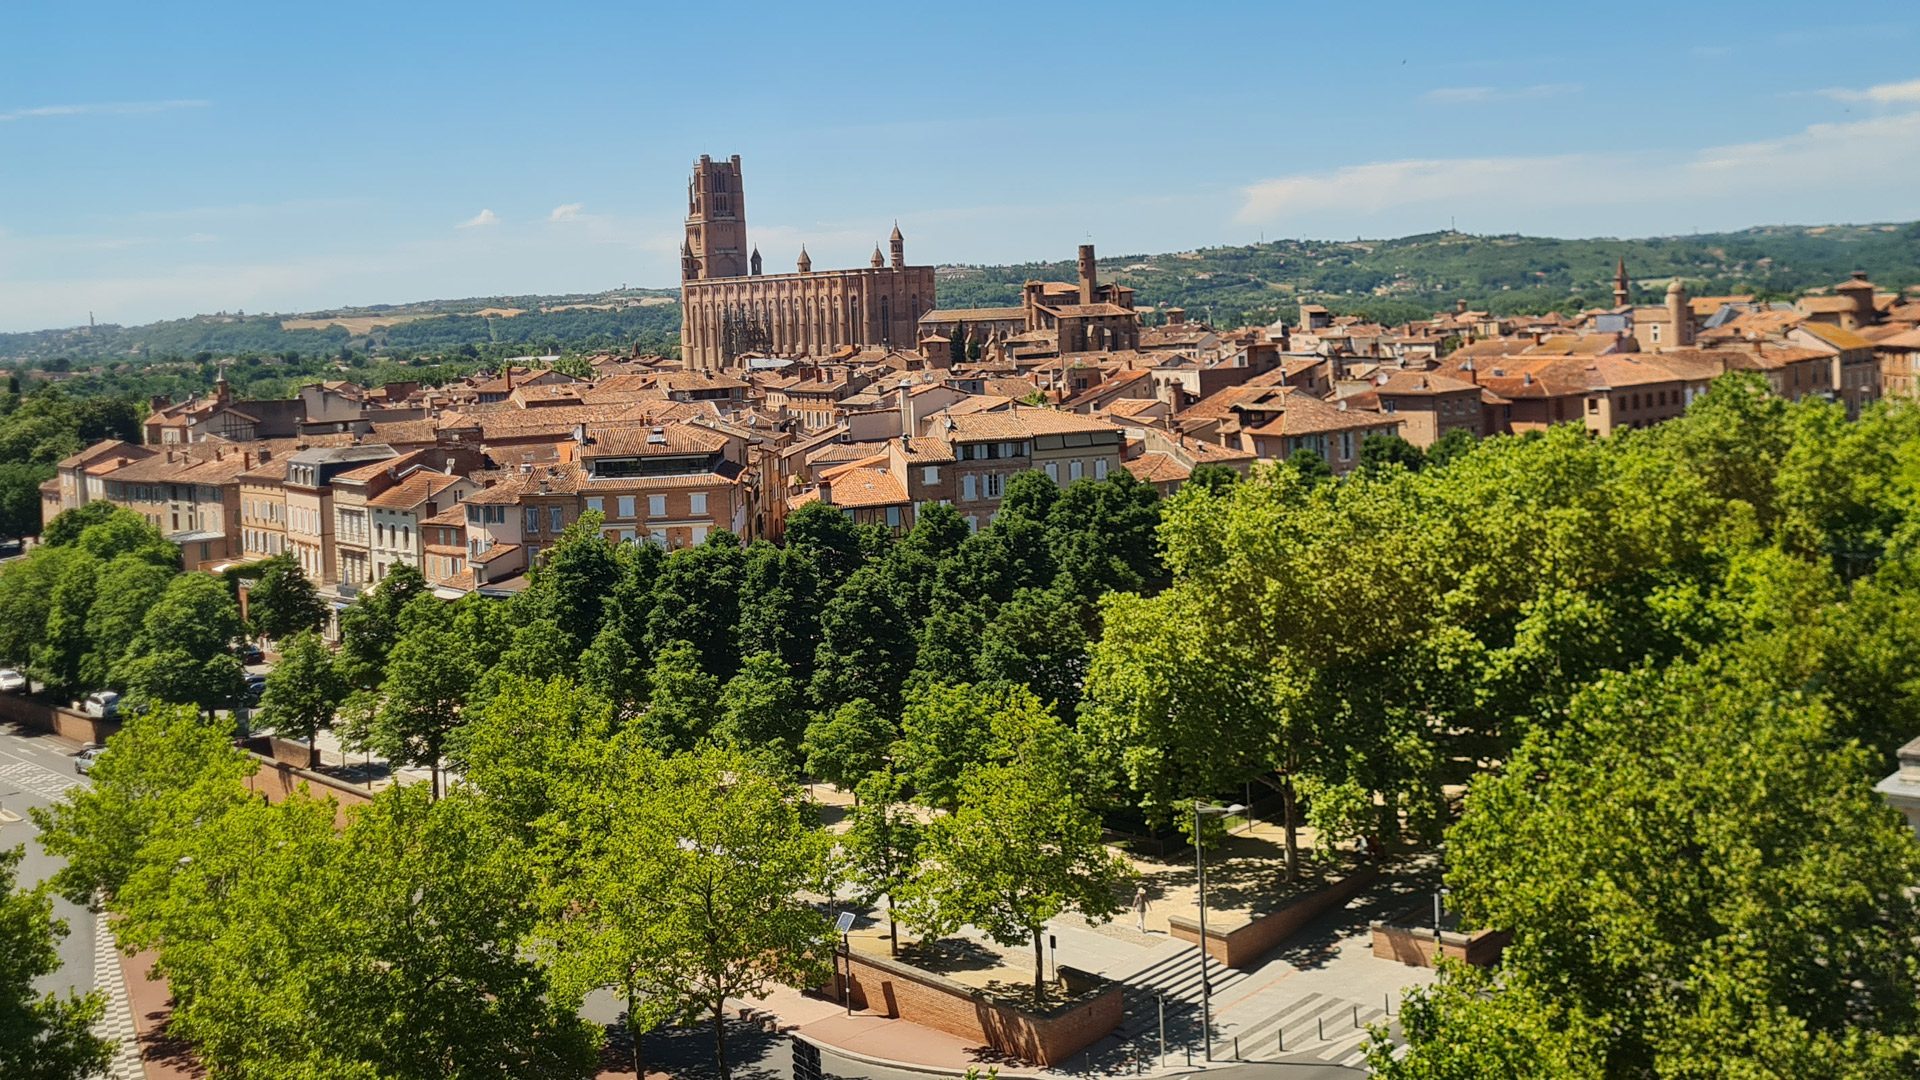 Albi panoramic view over the roofs of the historic center